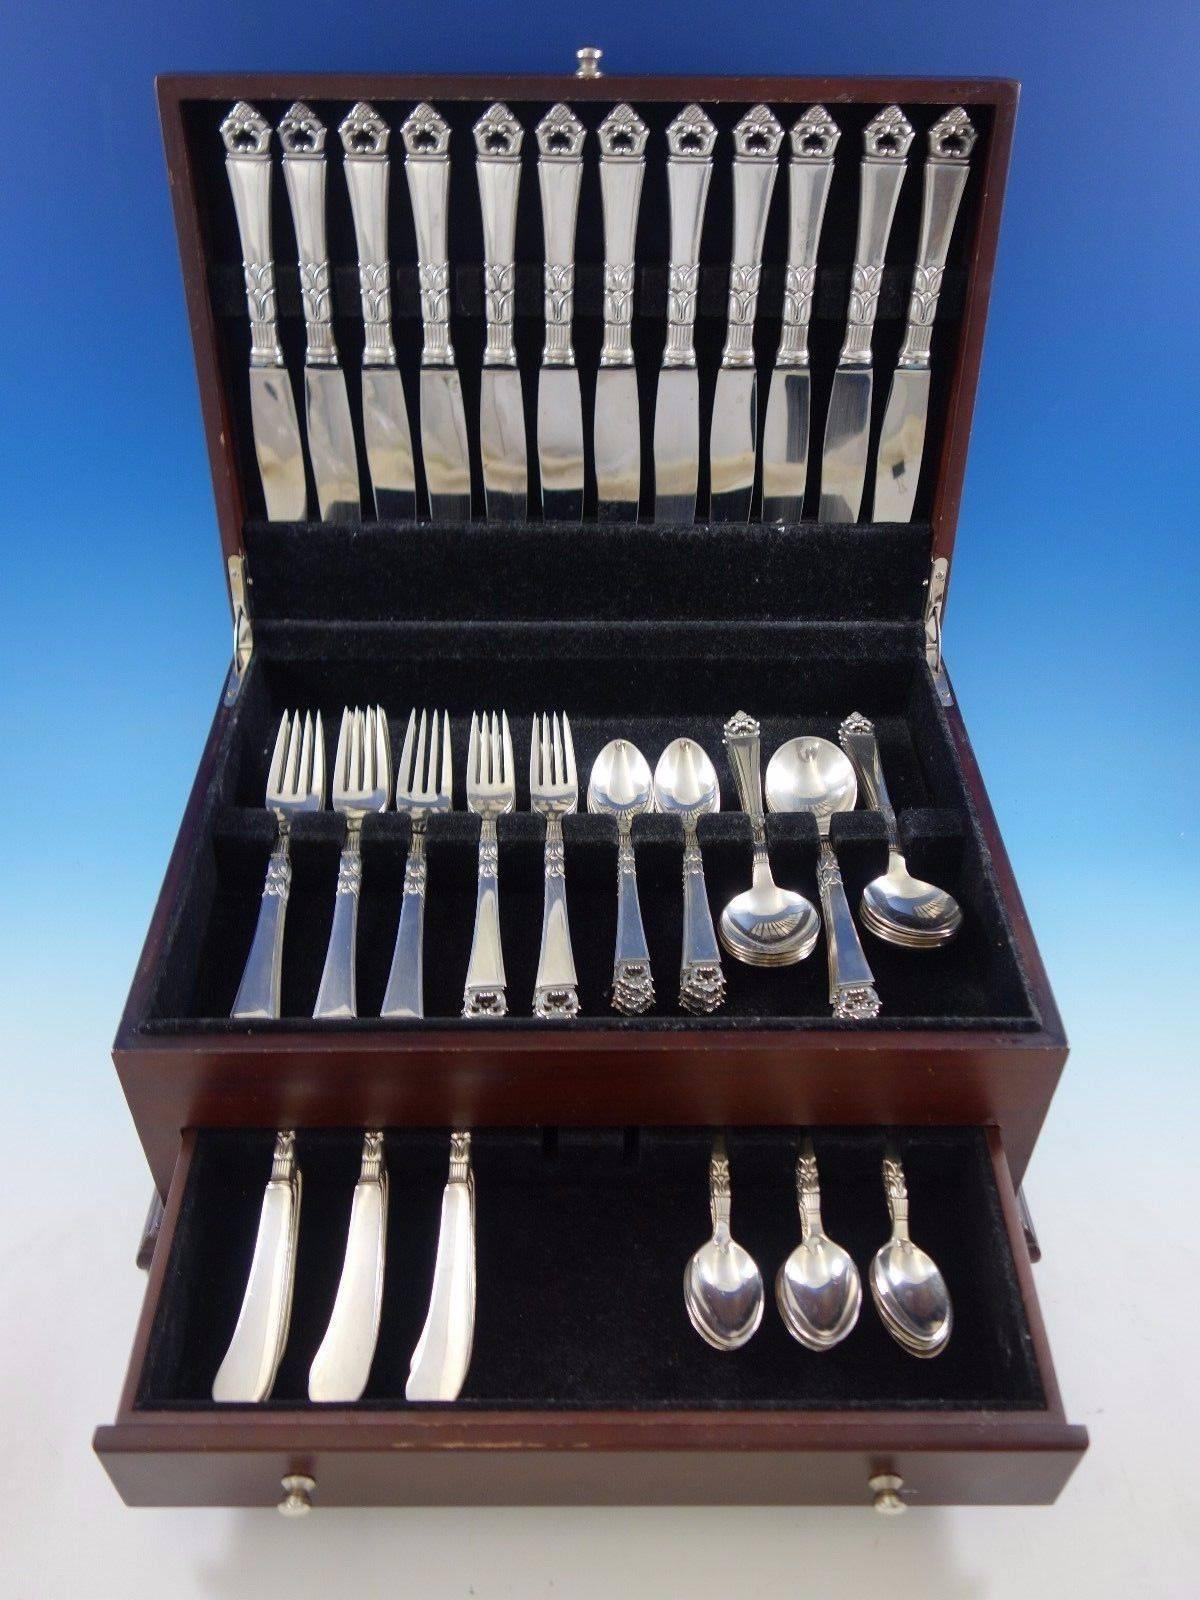 Danish Crown by Frigast sterling silver flatware set, 84 pieces. This set includes: 

12 dinner knives, 10 1/4